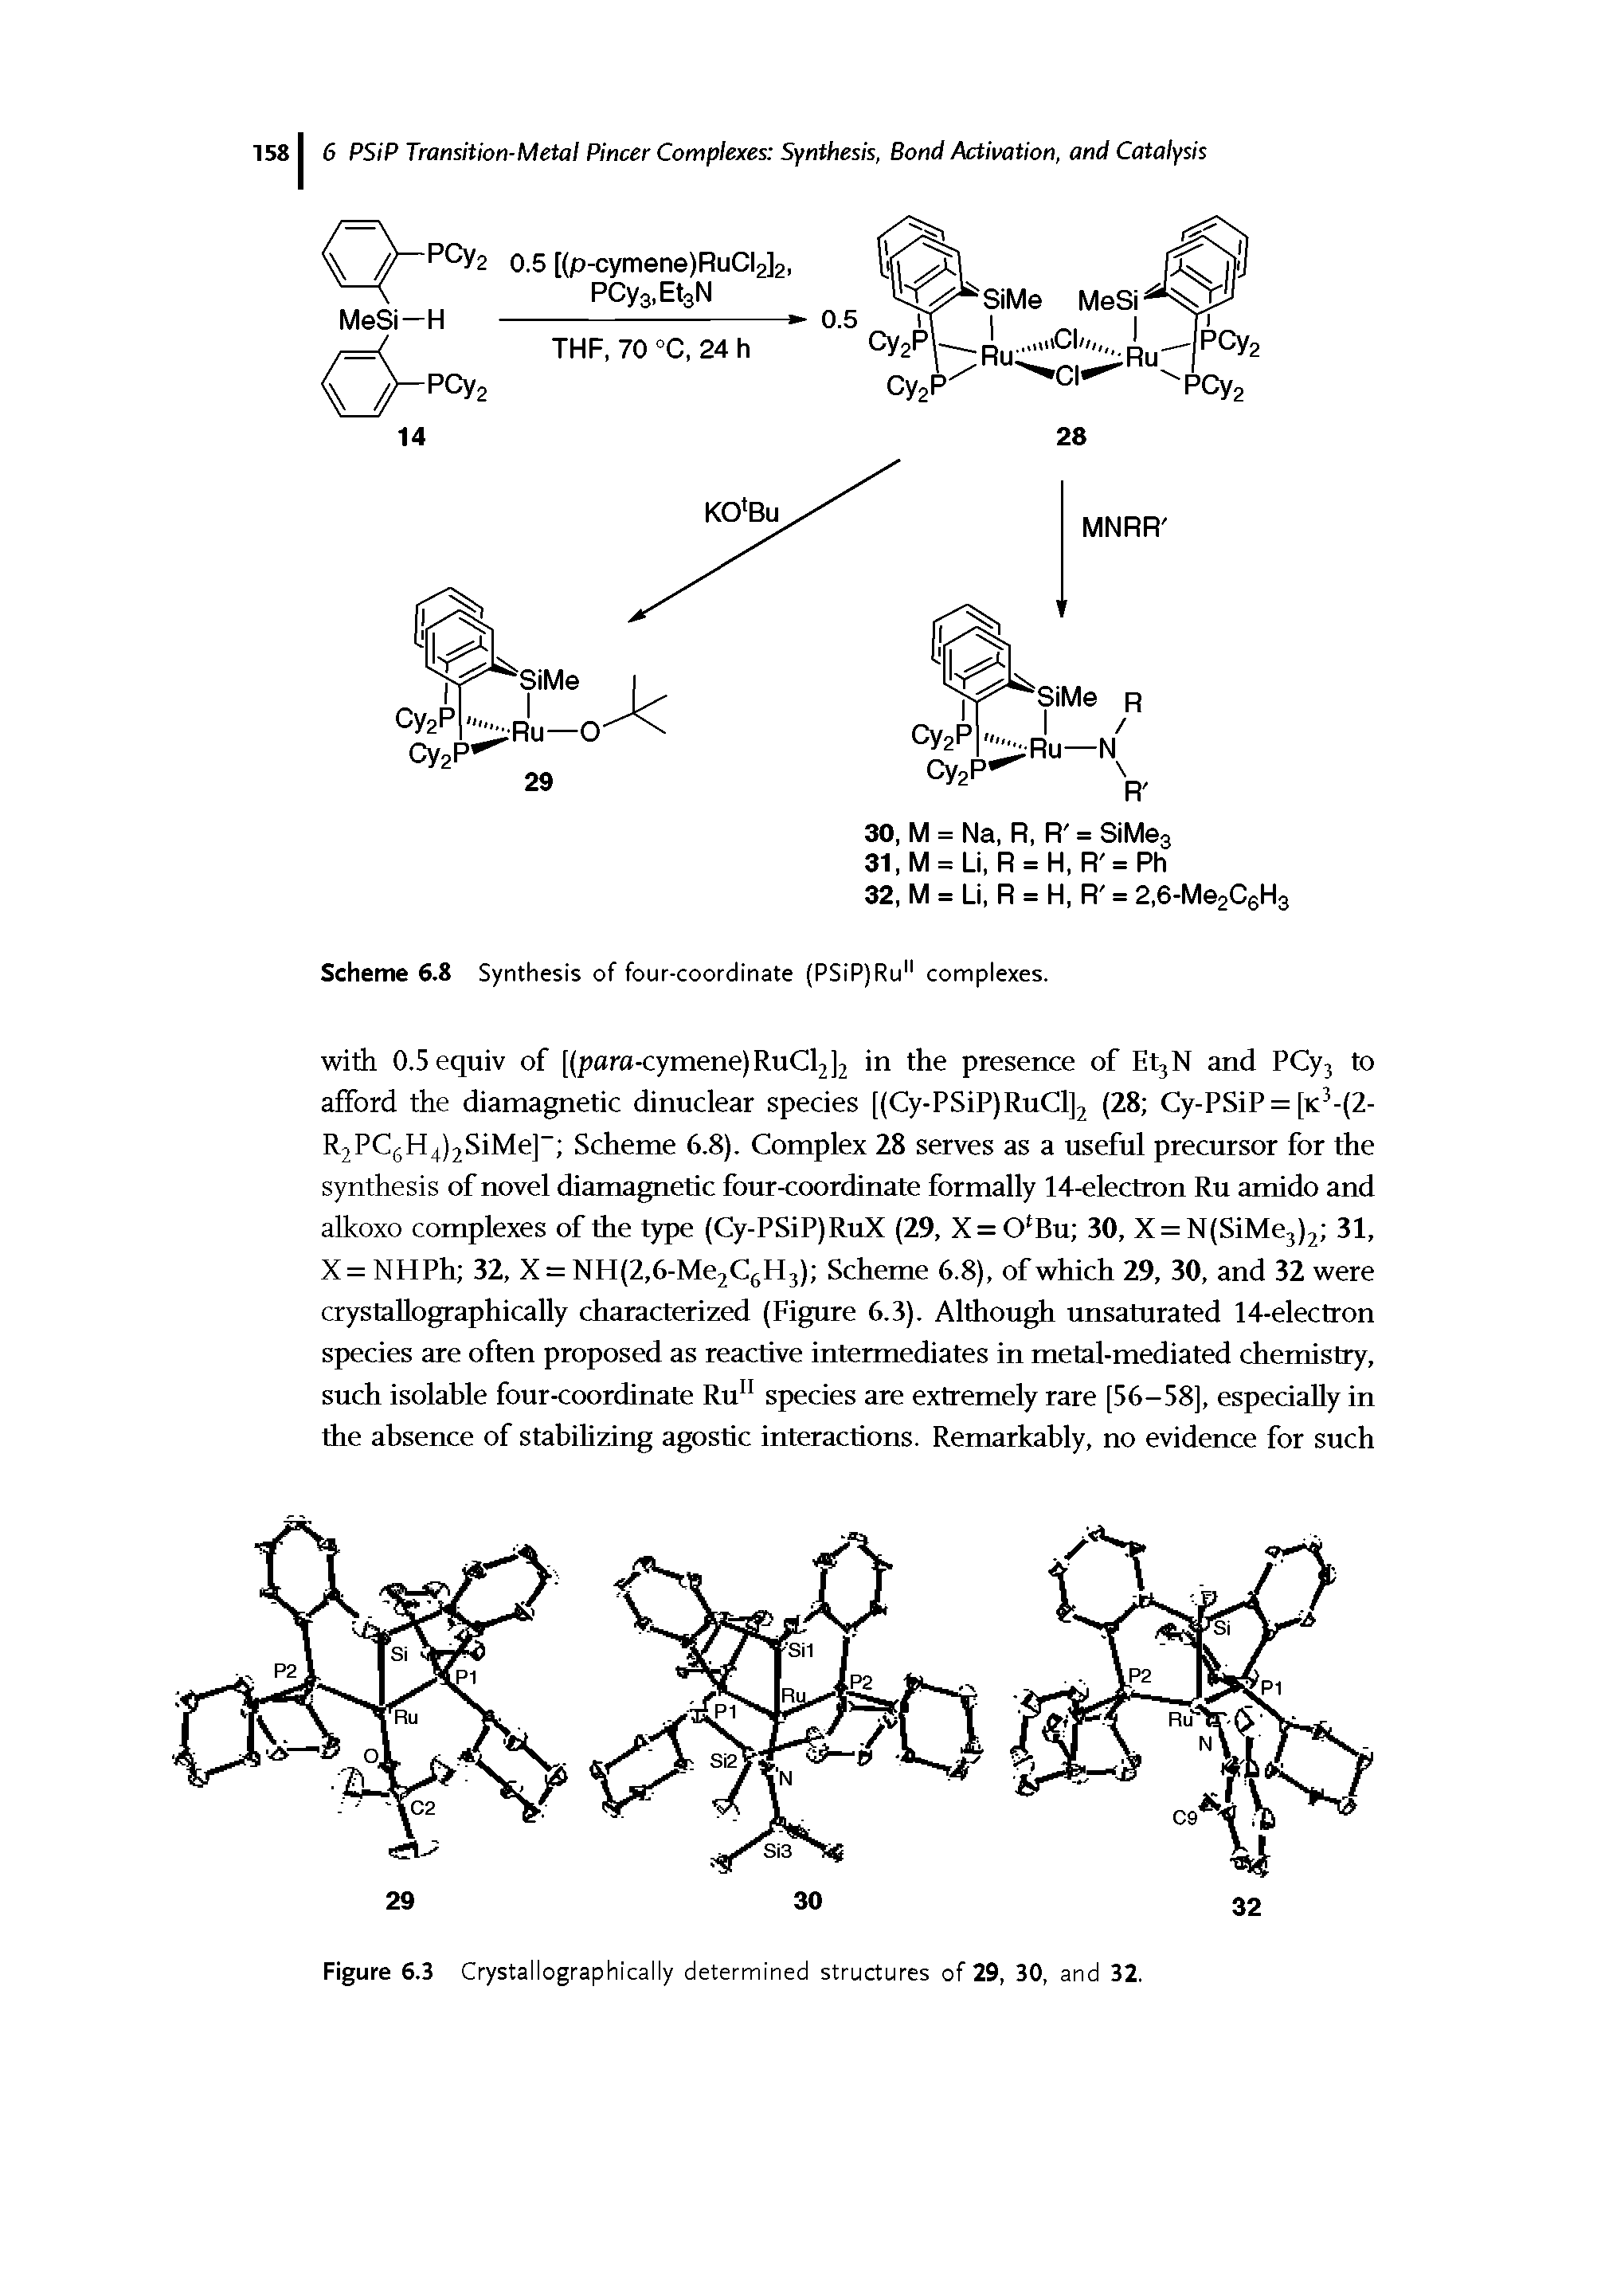 Scheme 6.8 Synthesis of four-coordinate (PSiP)Ru" complexes.